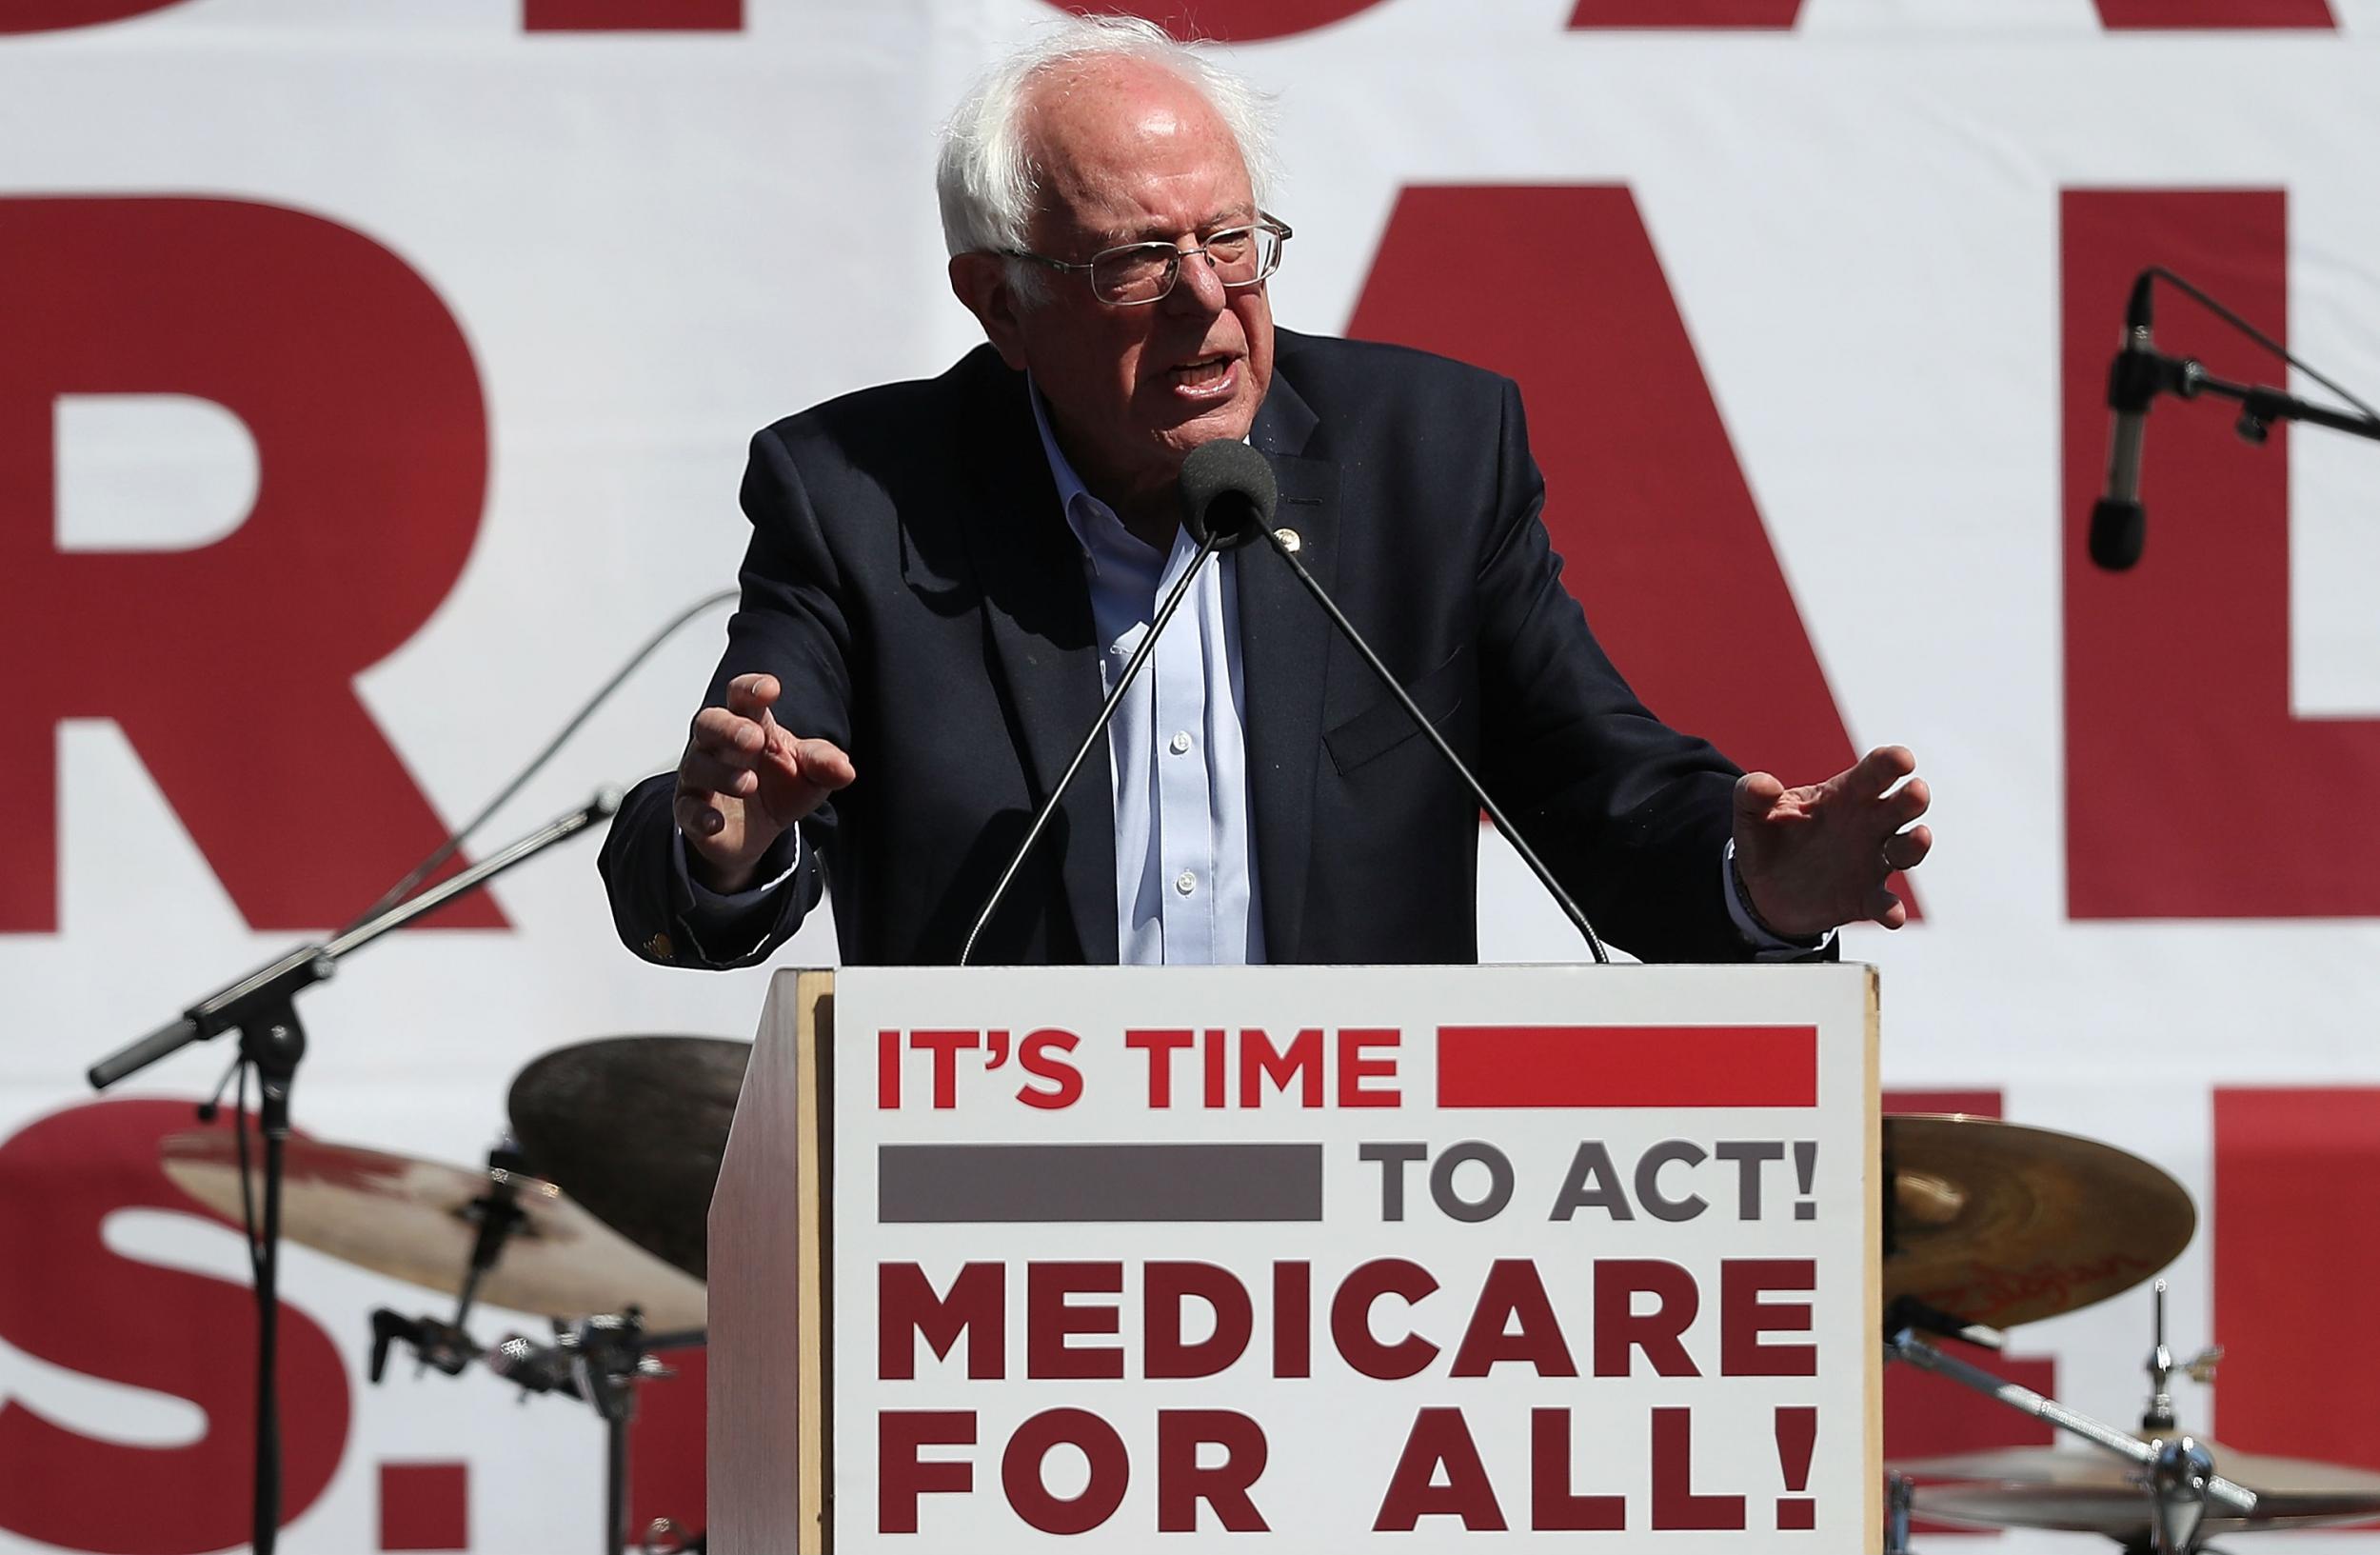 Bernie Sanders trumpeted his universal healthcare plan as an alternative to a faltering Republican bill in San Francisco, California on September 22, 2017